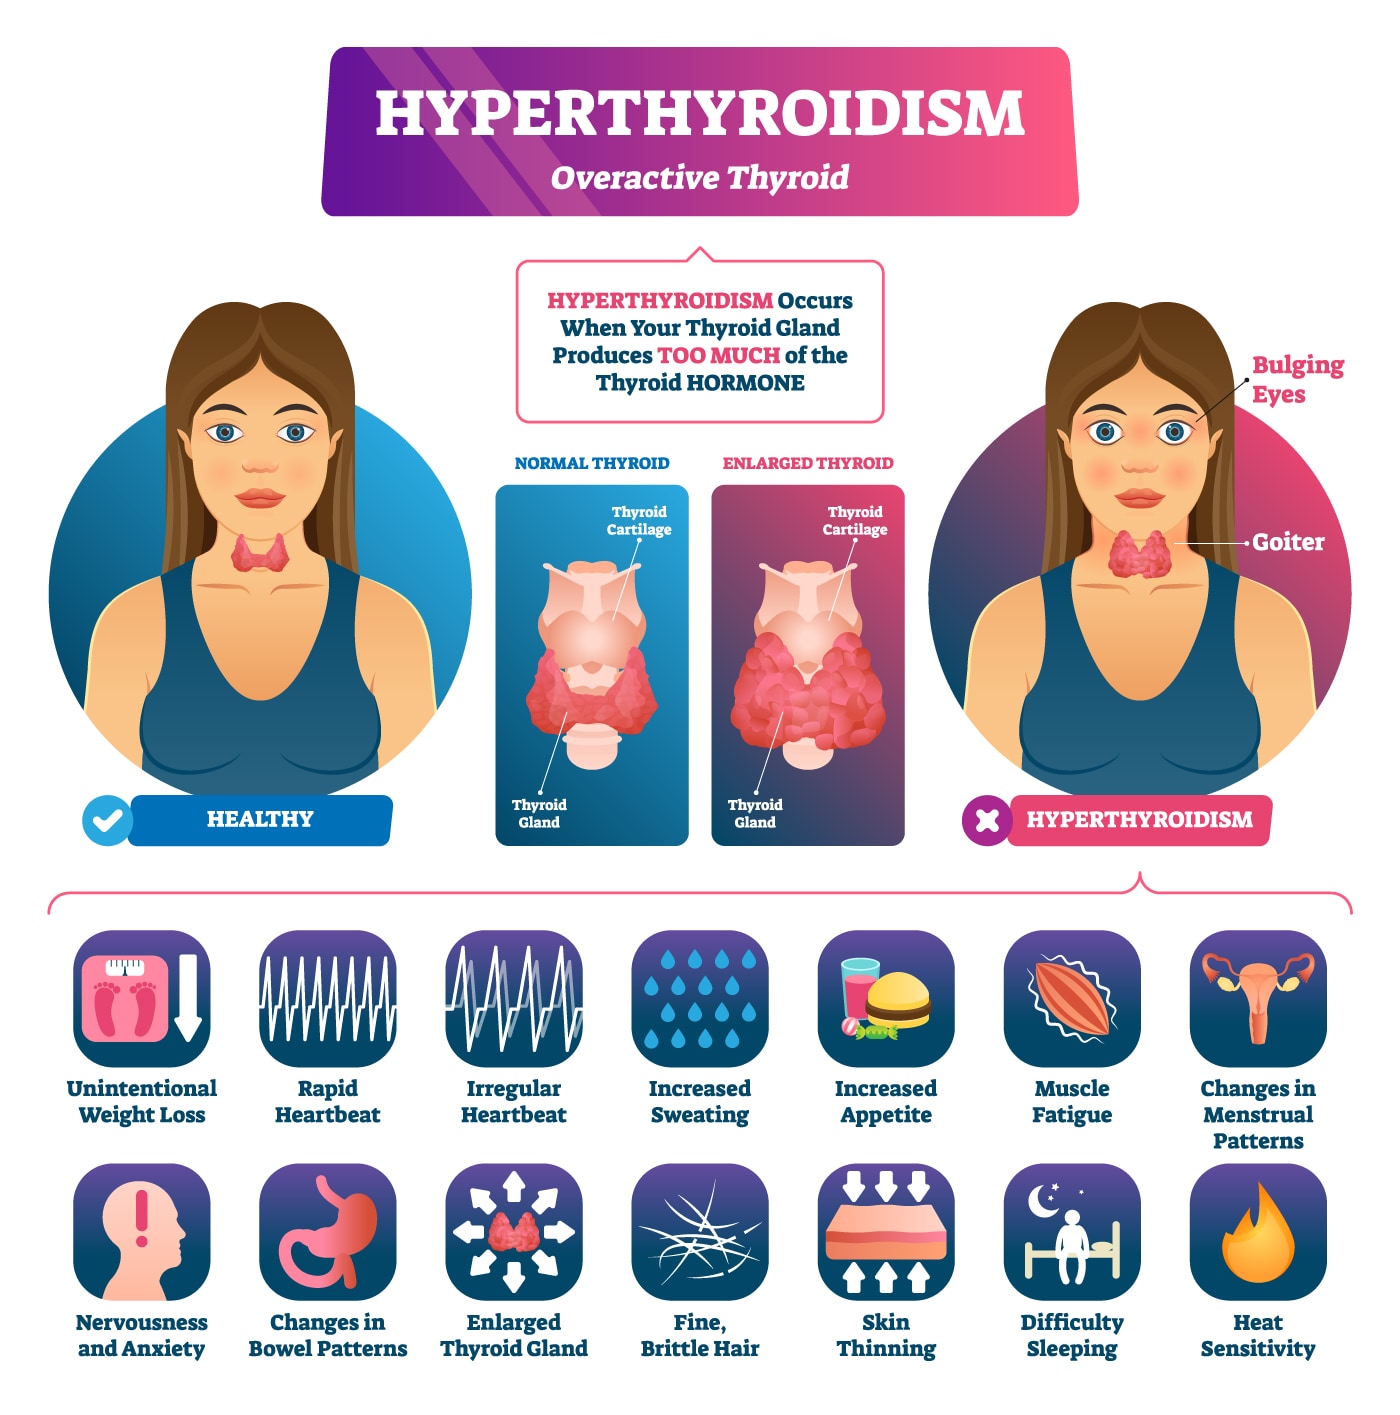 The signs and symptoms of Hyperthyroidism (overactive thyroid)